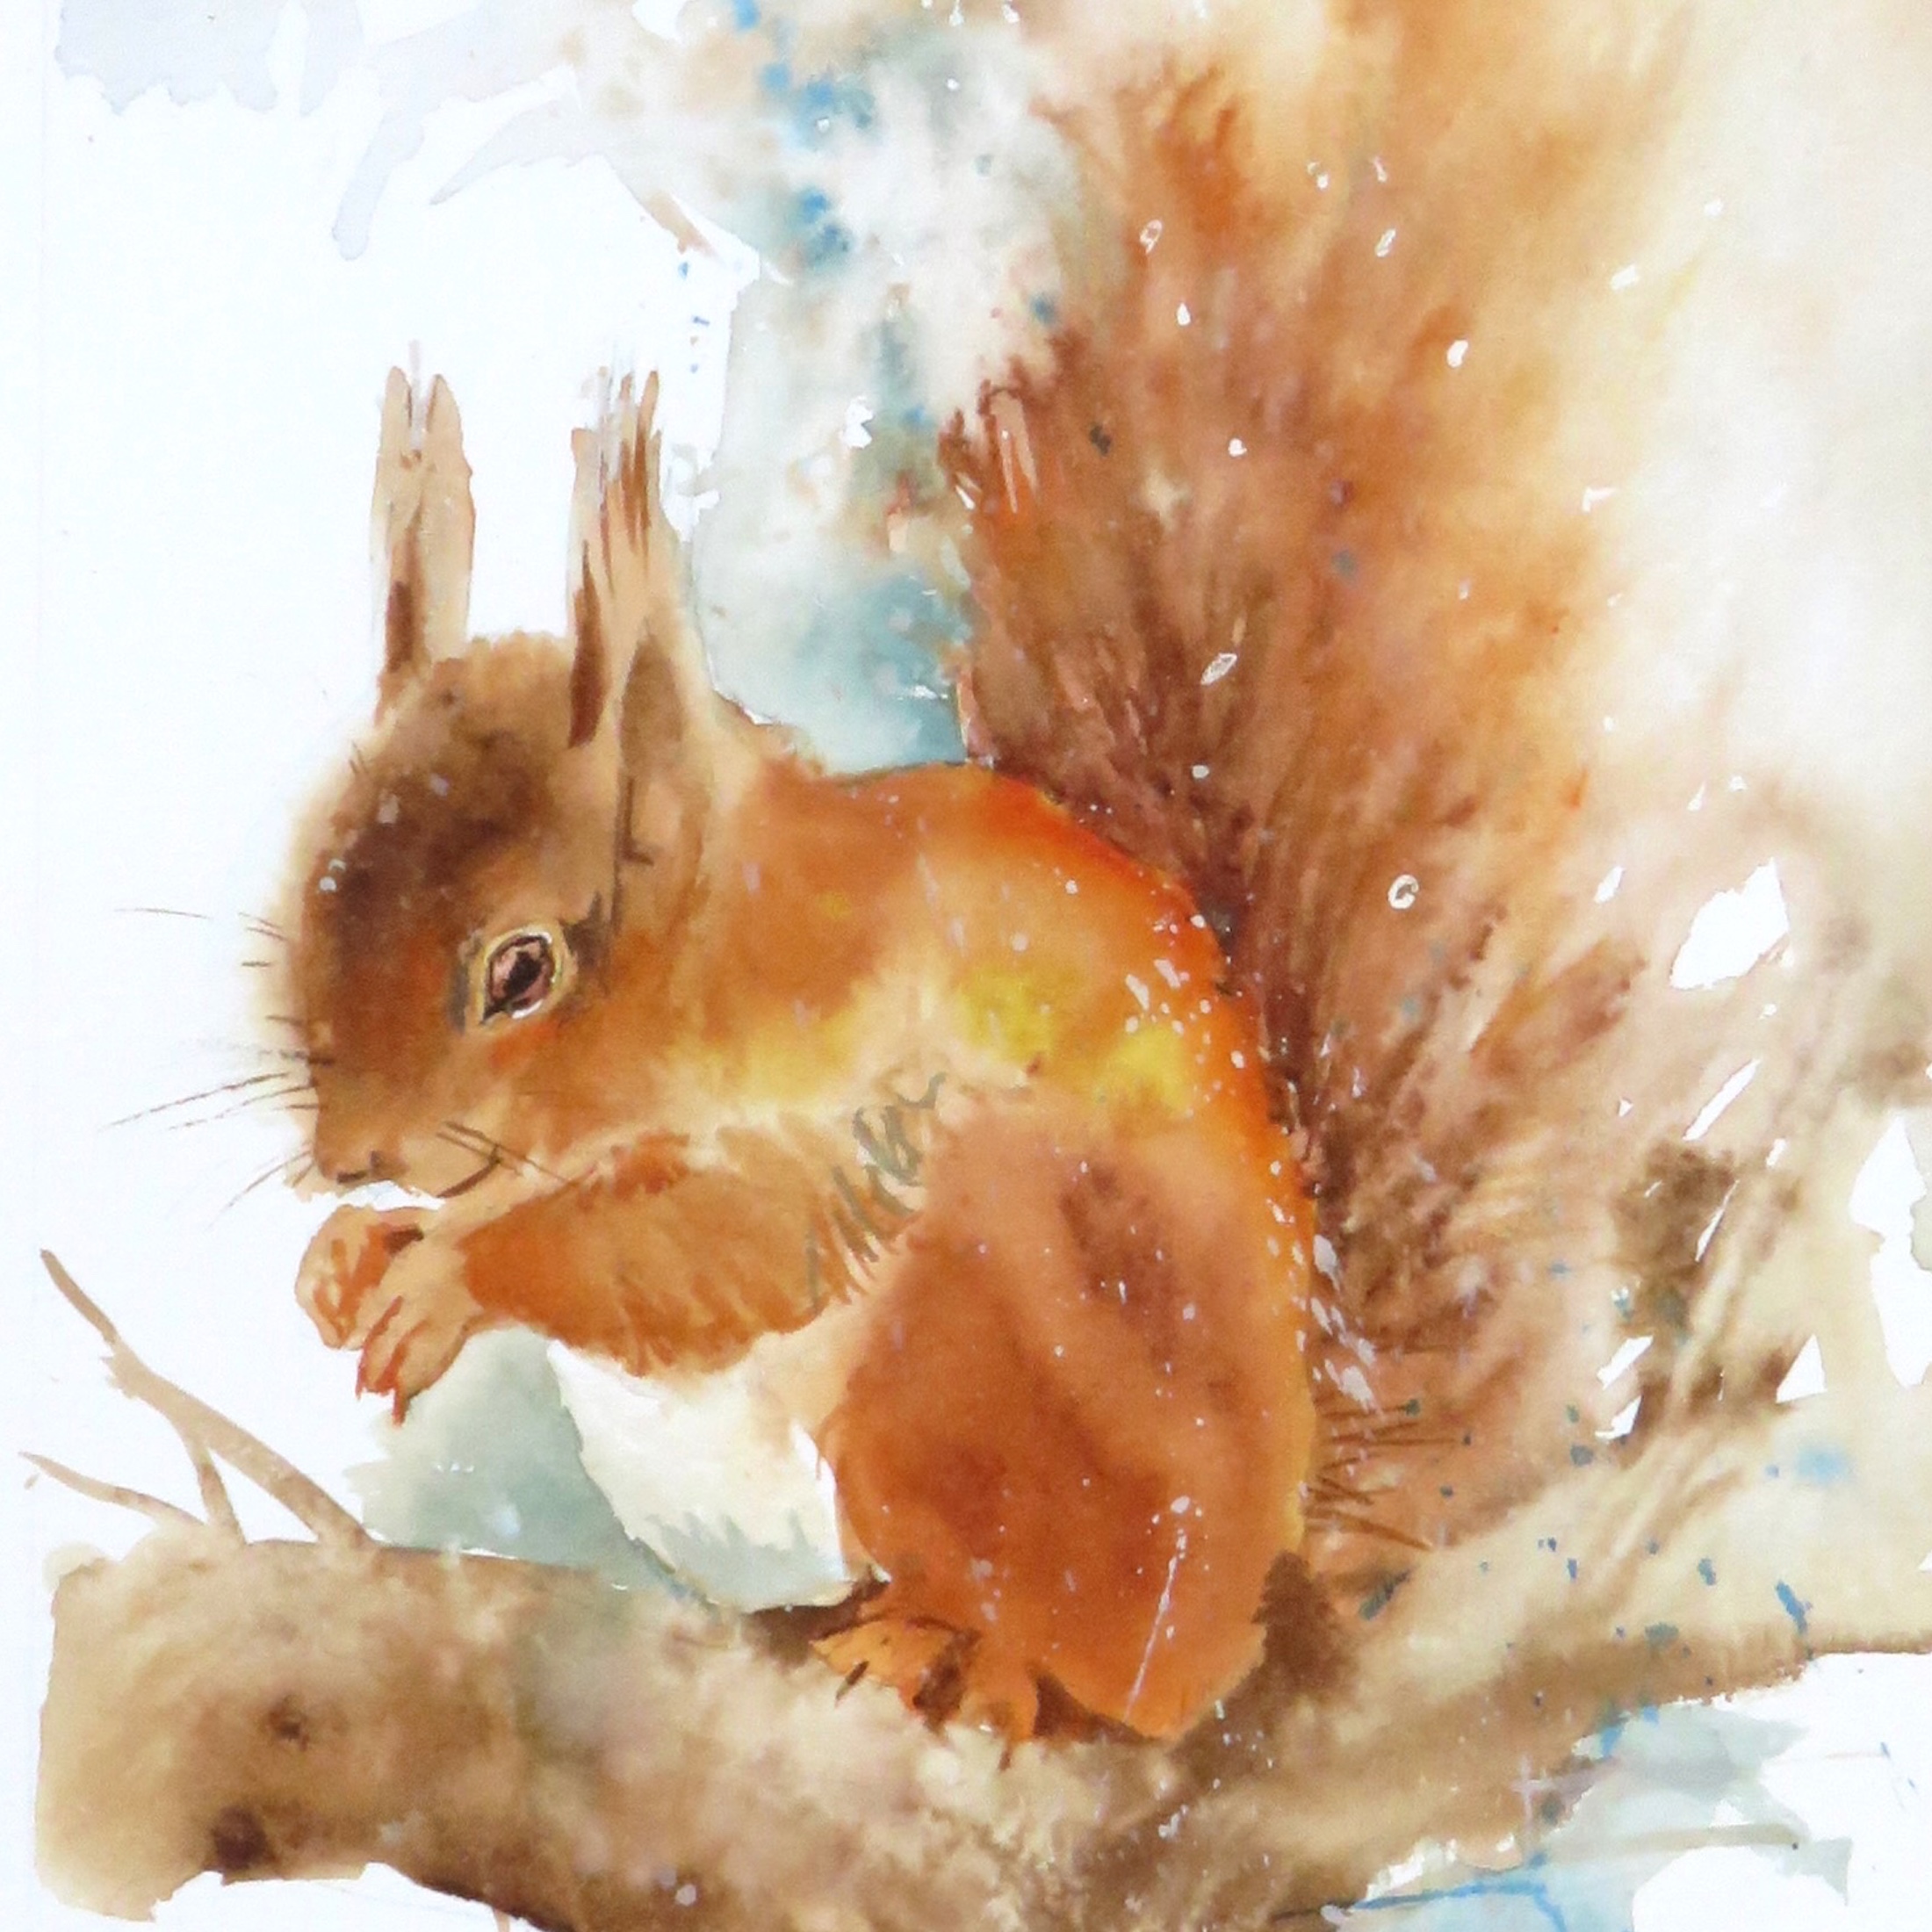 Red Squirrel Treat (Sold)